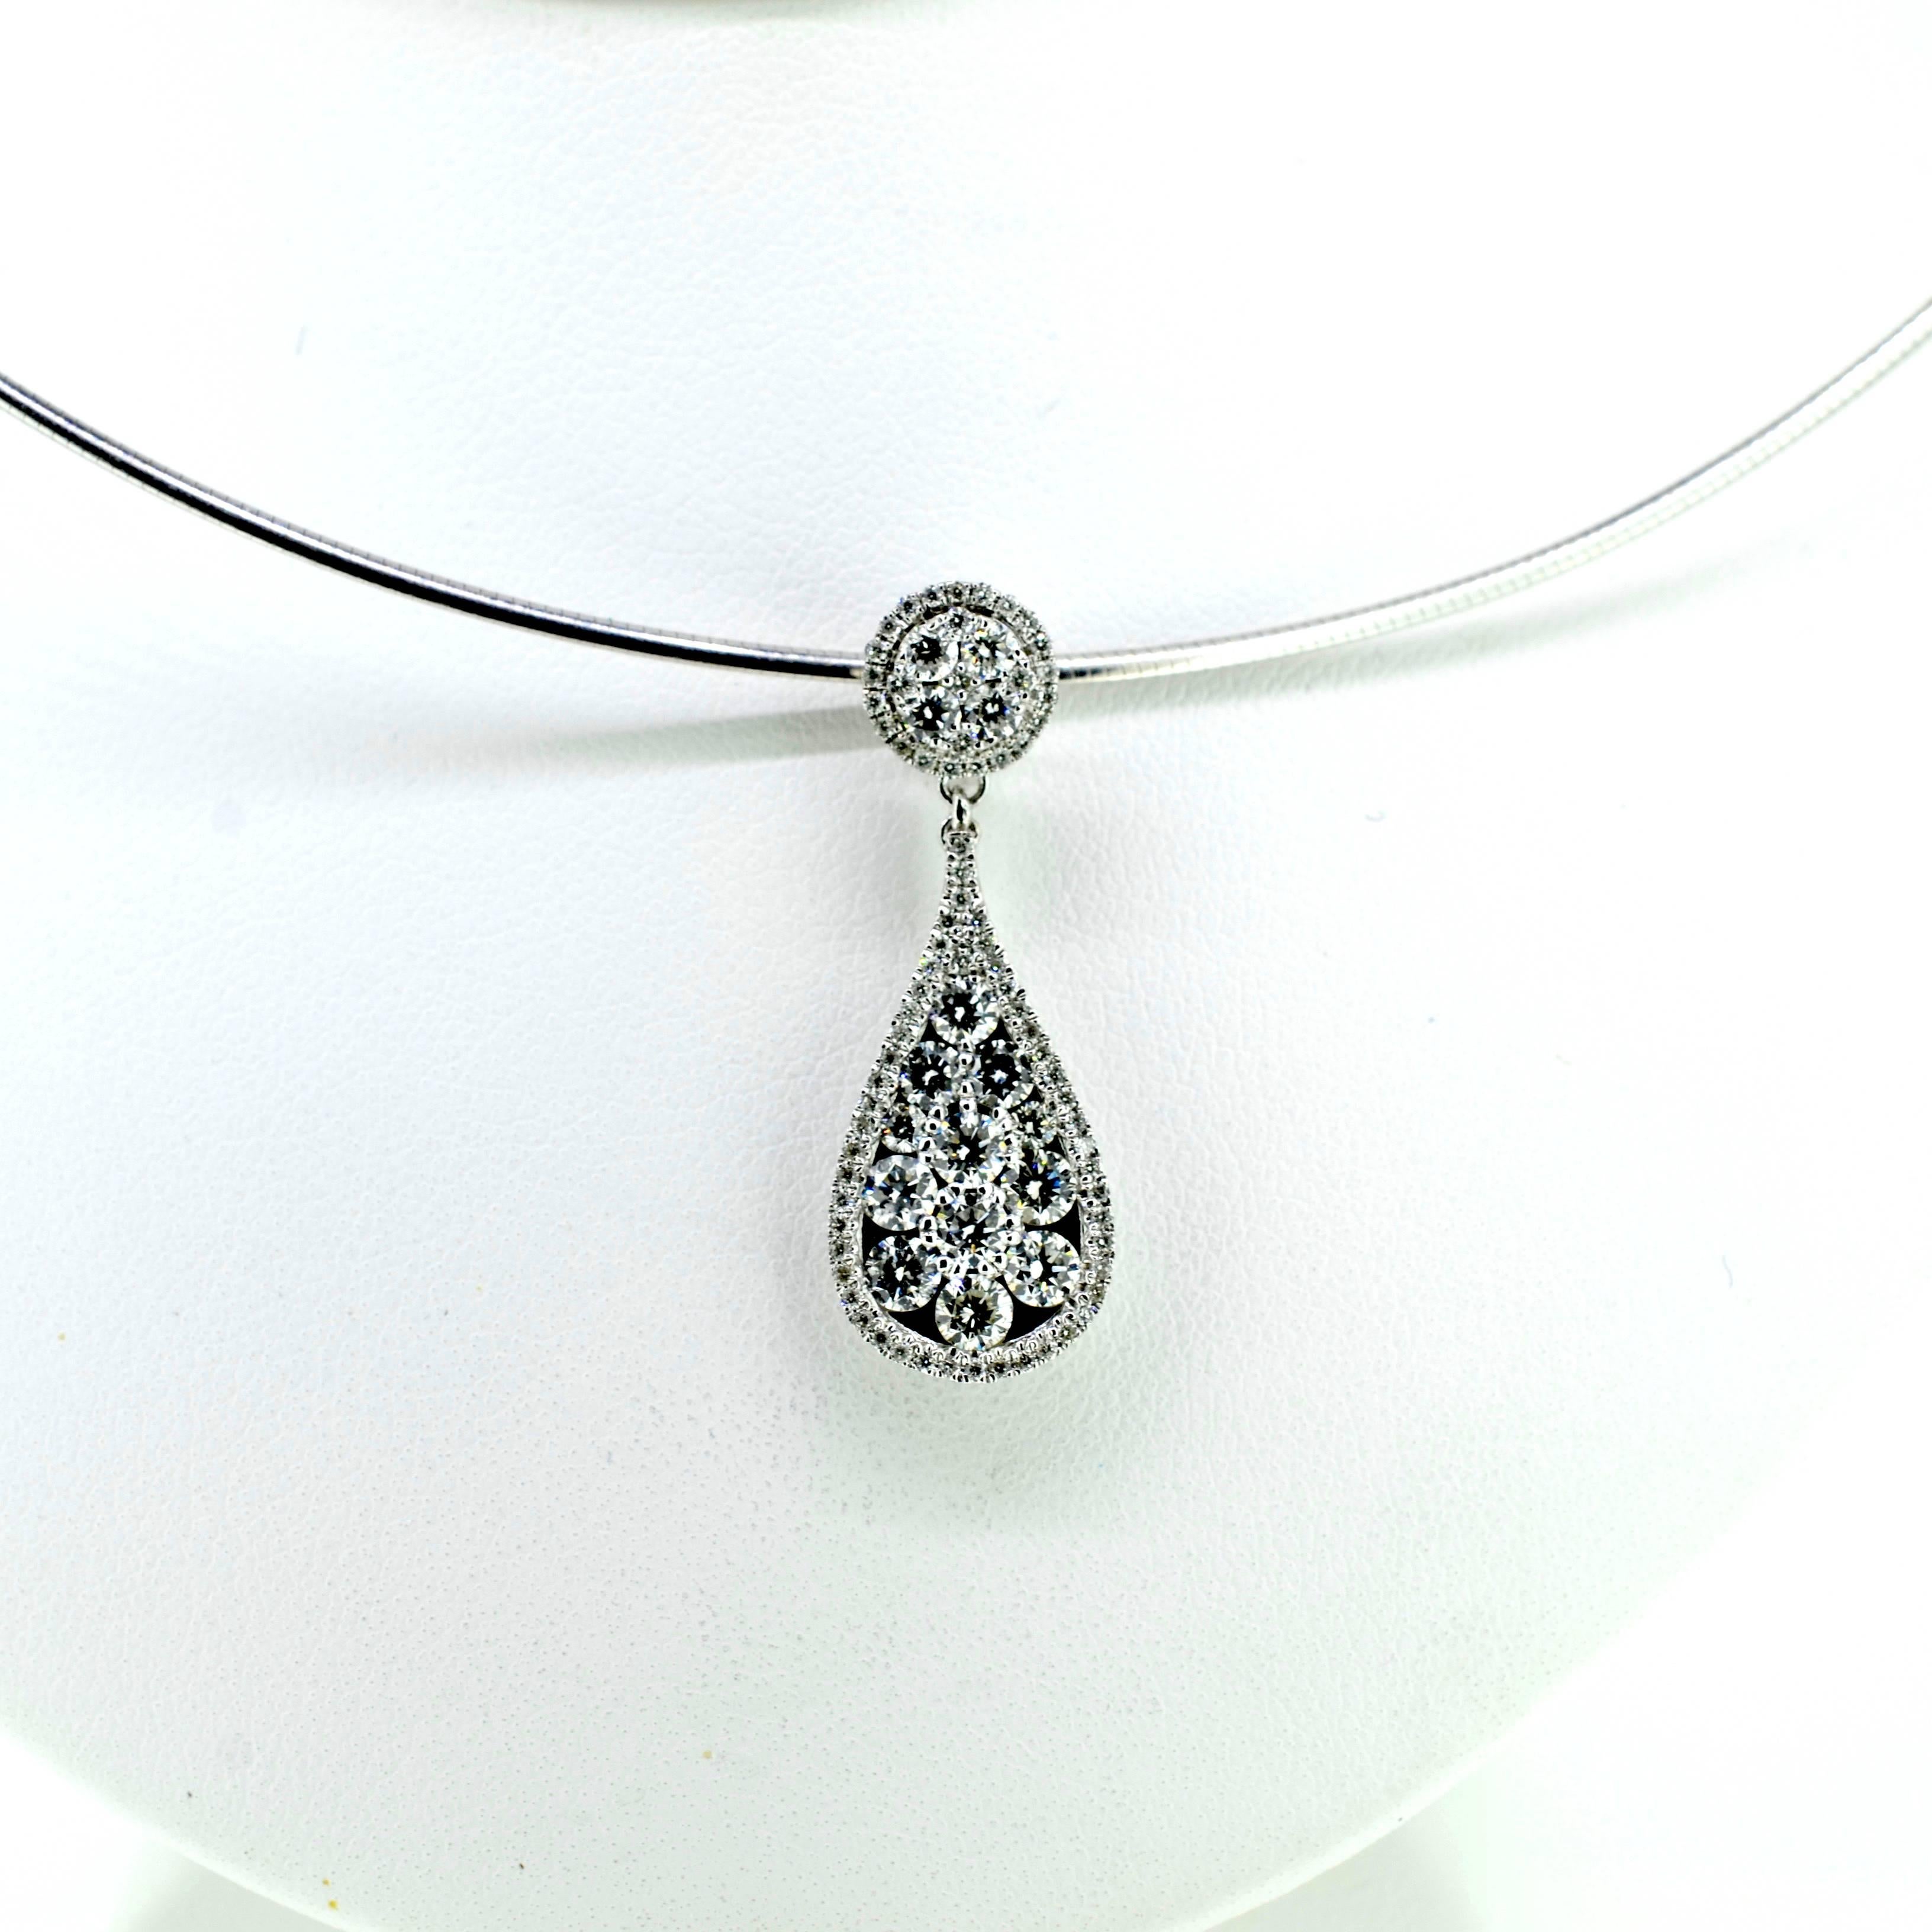 Pave set diamonds in a double drop pendant 1.25 inches long with round and teardrop shapes in 18kt white gold. 1.32ct total weight diamonds full cut VS clarity G-H color. 14kt gold neck wire 18 inches in length.